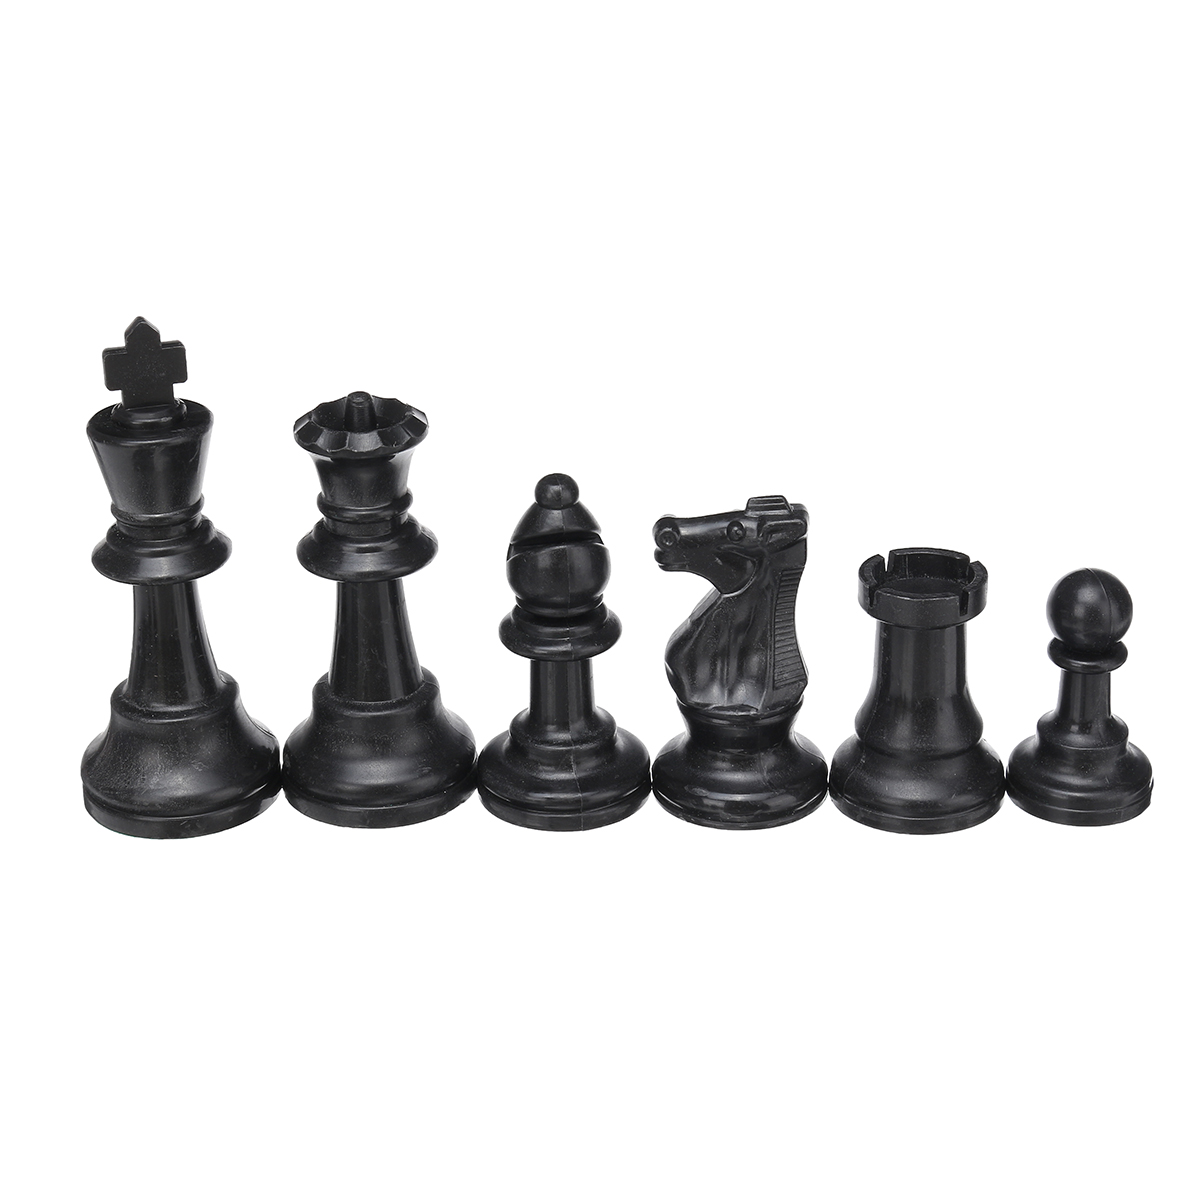 32-Piece-Game-Chess-Foldable-957564cm-King-Knight-Set-Outdoor-Recreation-Family-Camping-Game-1638530-4